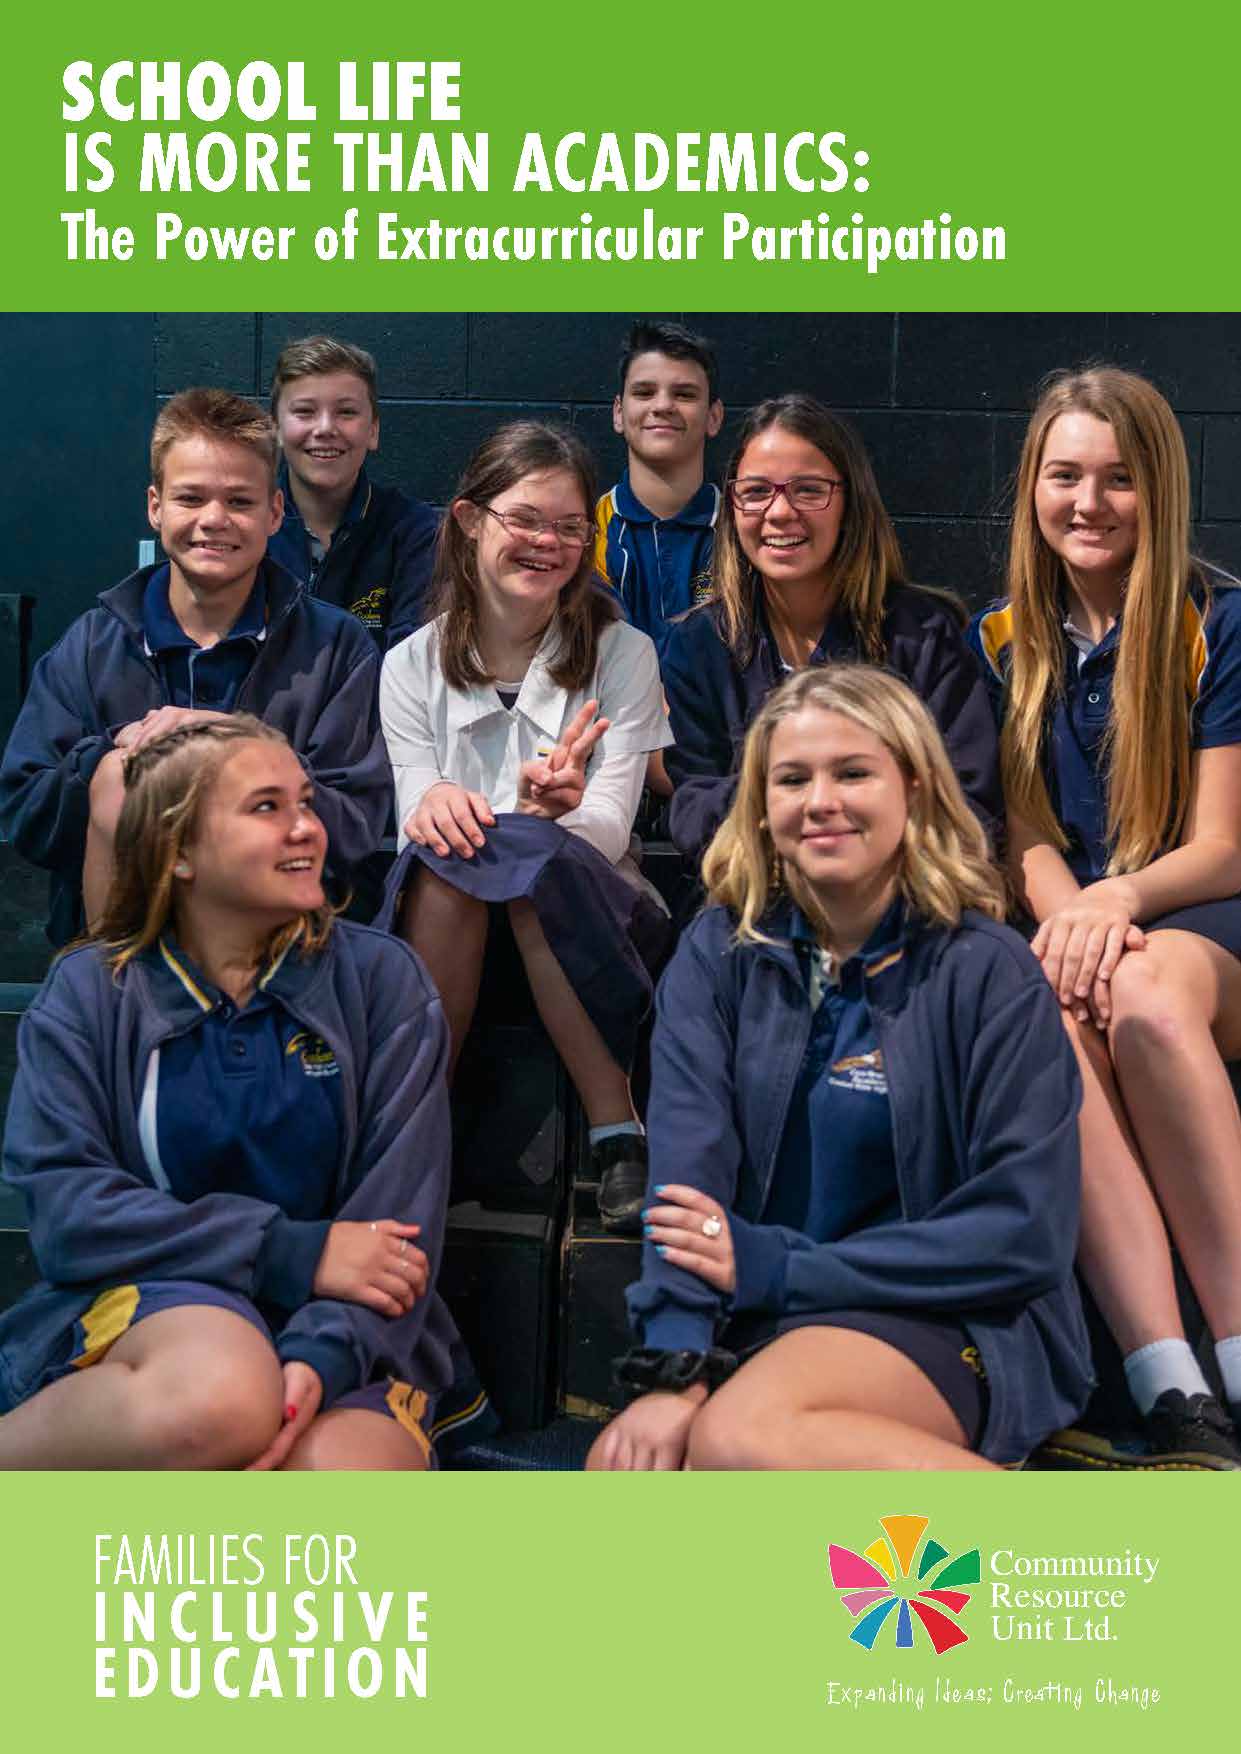 The cover of the booklet titled 'school life is more than academics. The power of extracurricular participation'. Has a group of male and female students in uniform sitting close together and smiling. One of them has a down syndrome.